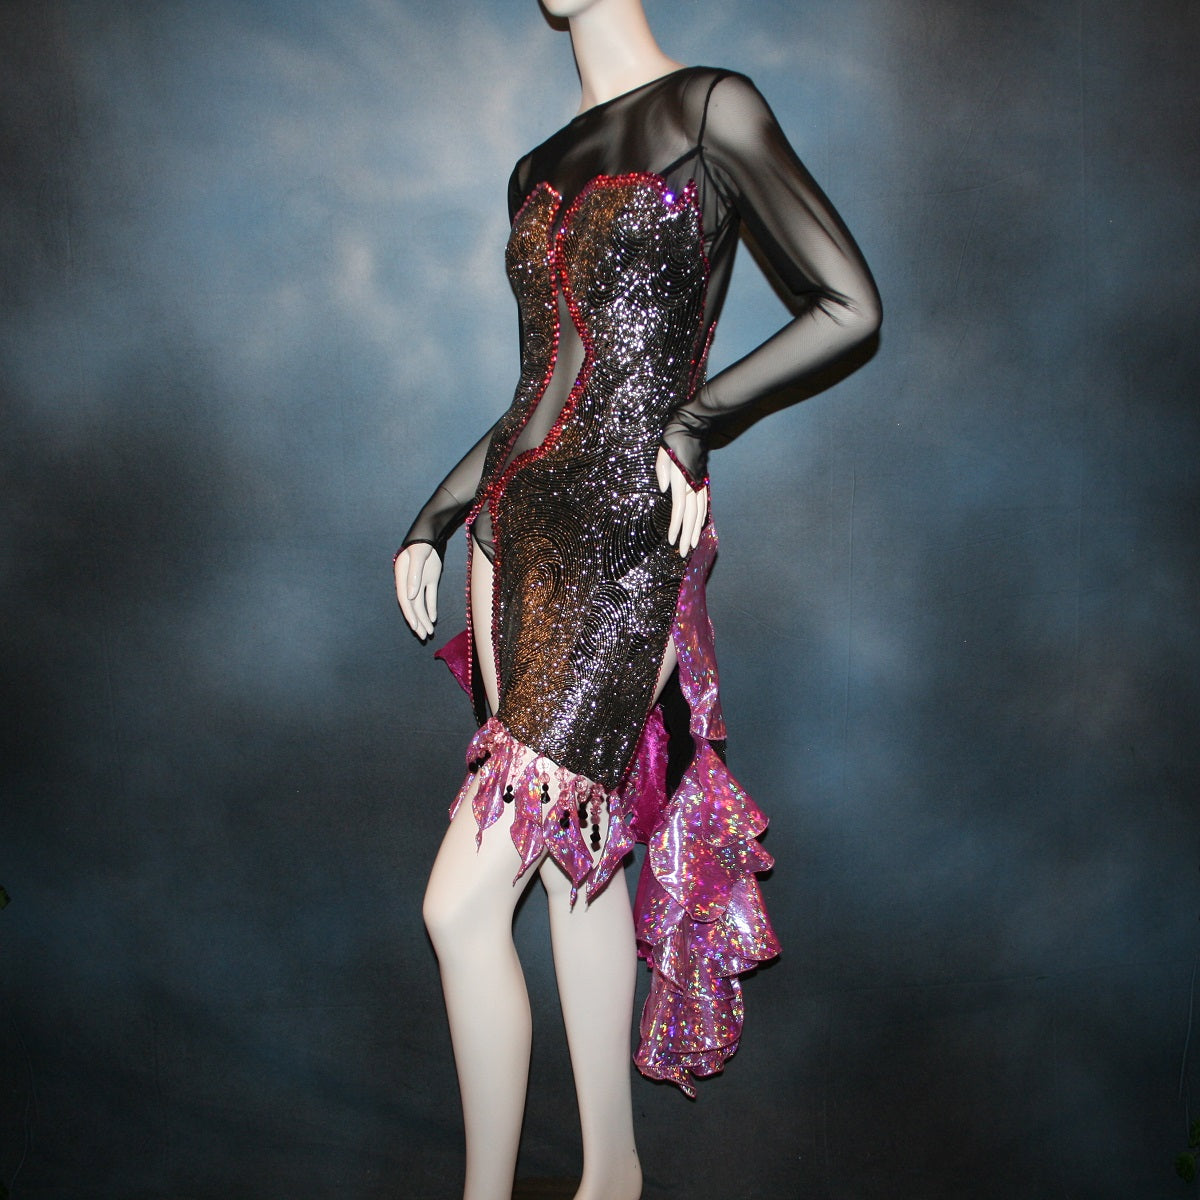 Crystal's Creations close left side front view of Black & silver Latin/rhythm dress with pink accents created of gorgeous silver swirls on black glitter slinky on a sheer stretch mesh base, embellished with pink Swarovski rhinestone work & hand beading